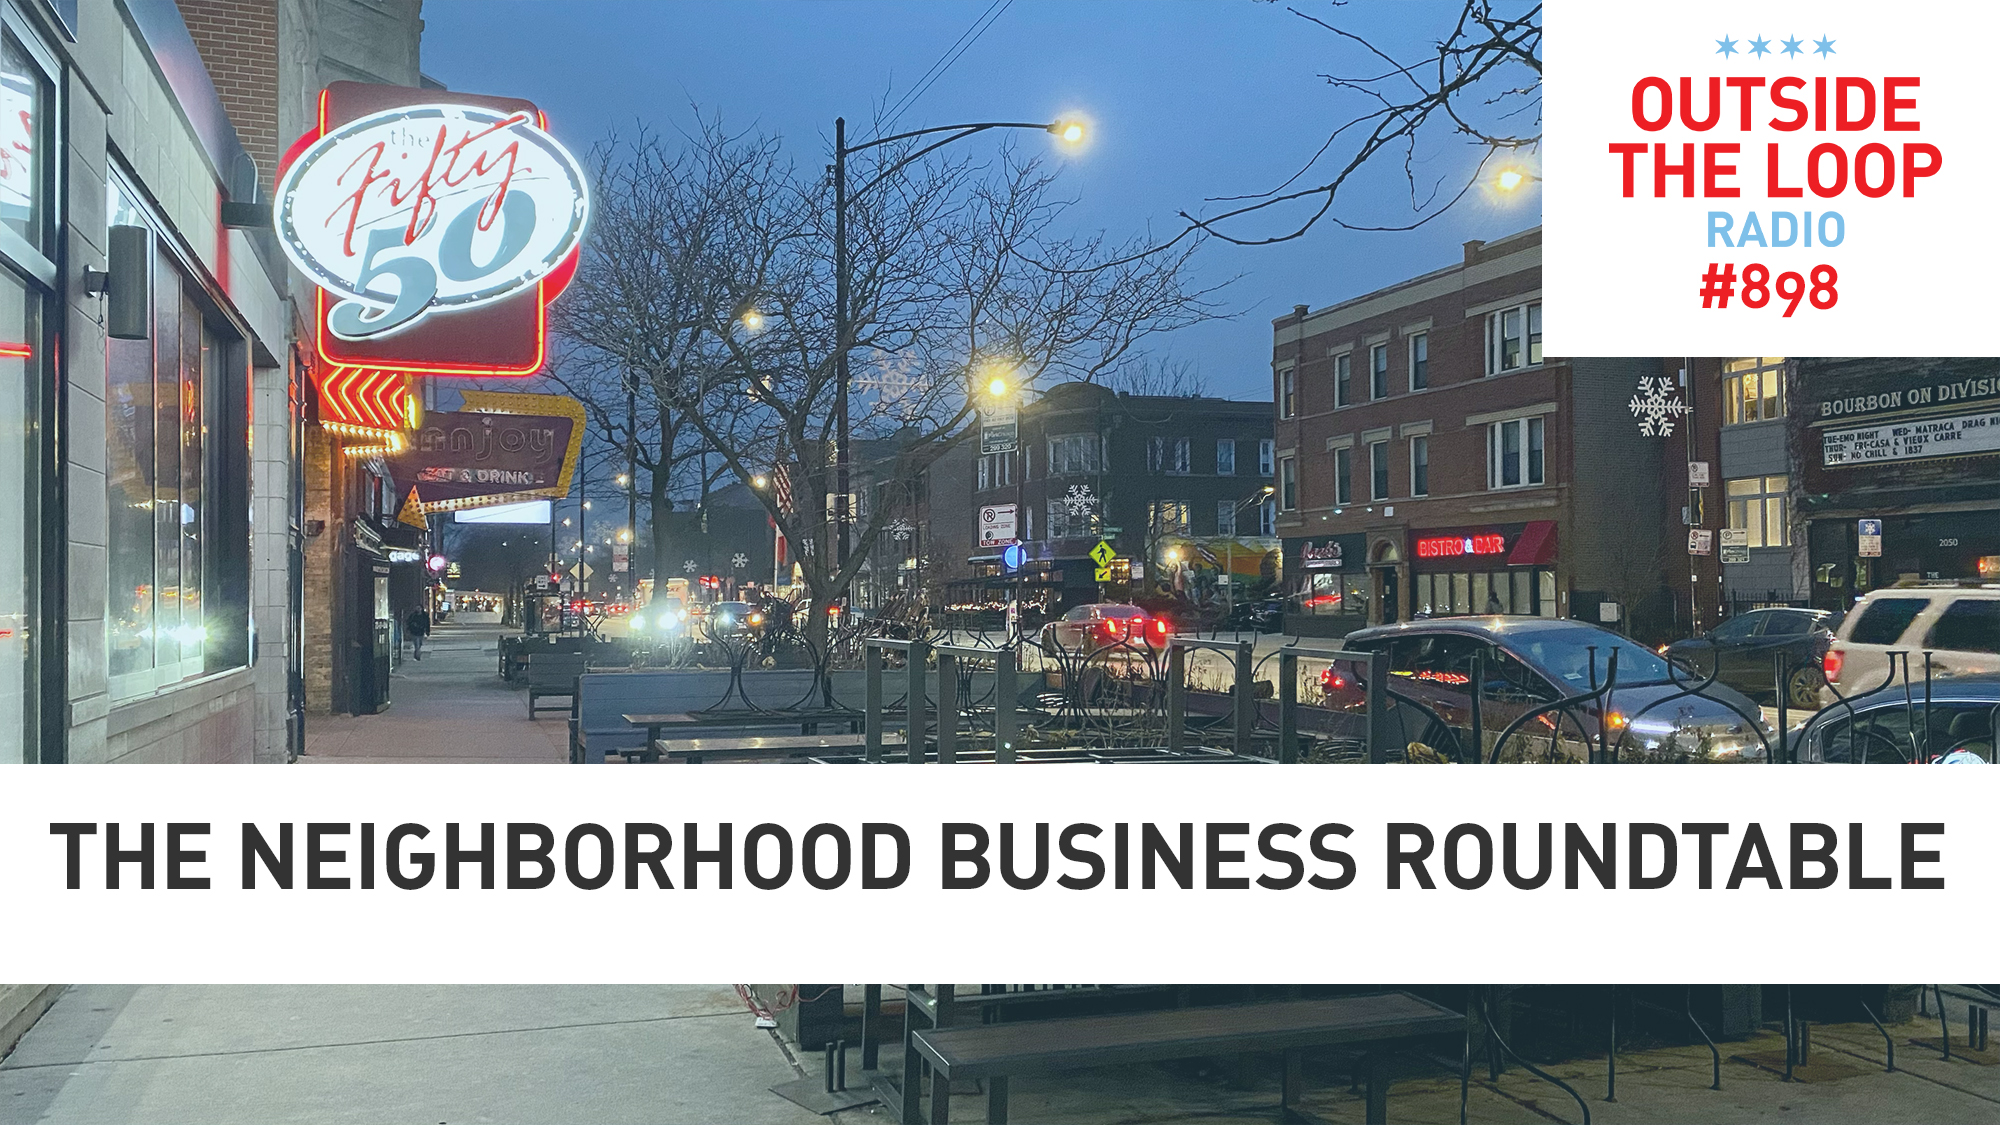 We head over to Wicker Park to discuss the challenges facing local business owners this past year. (Photo credit: Mike Stephen/WGN Radio)